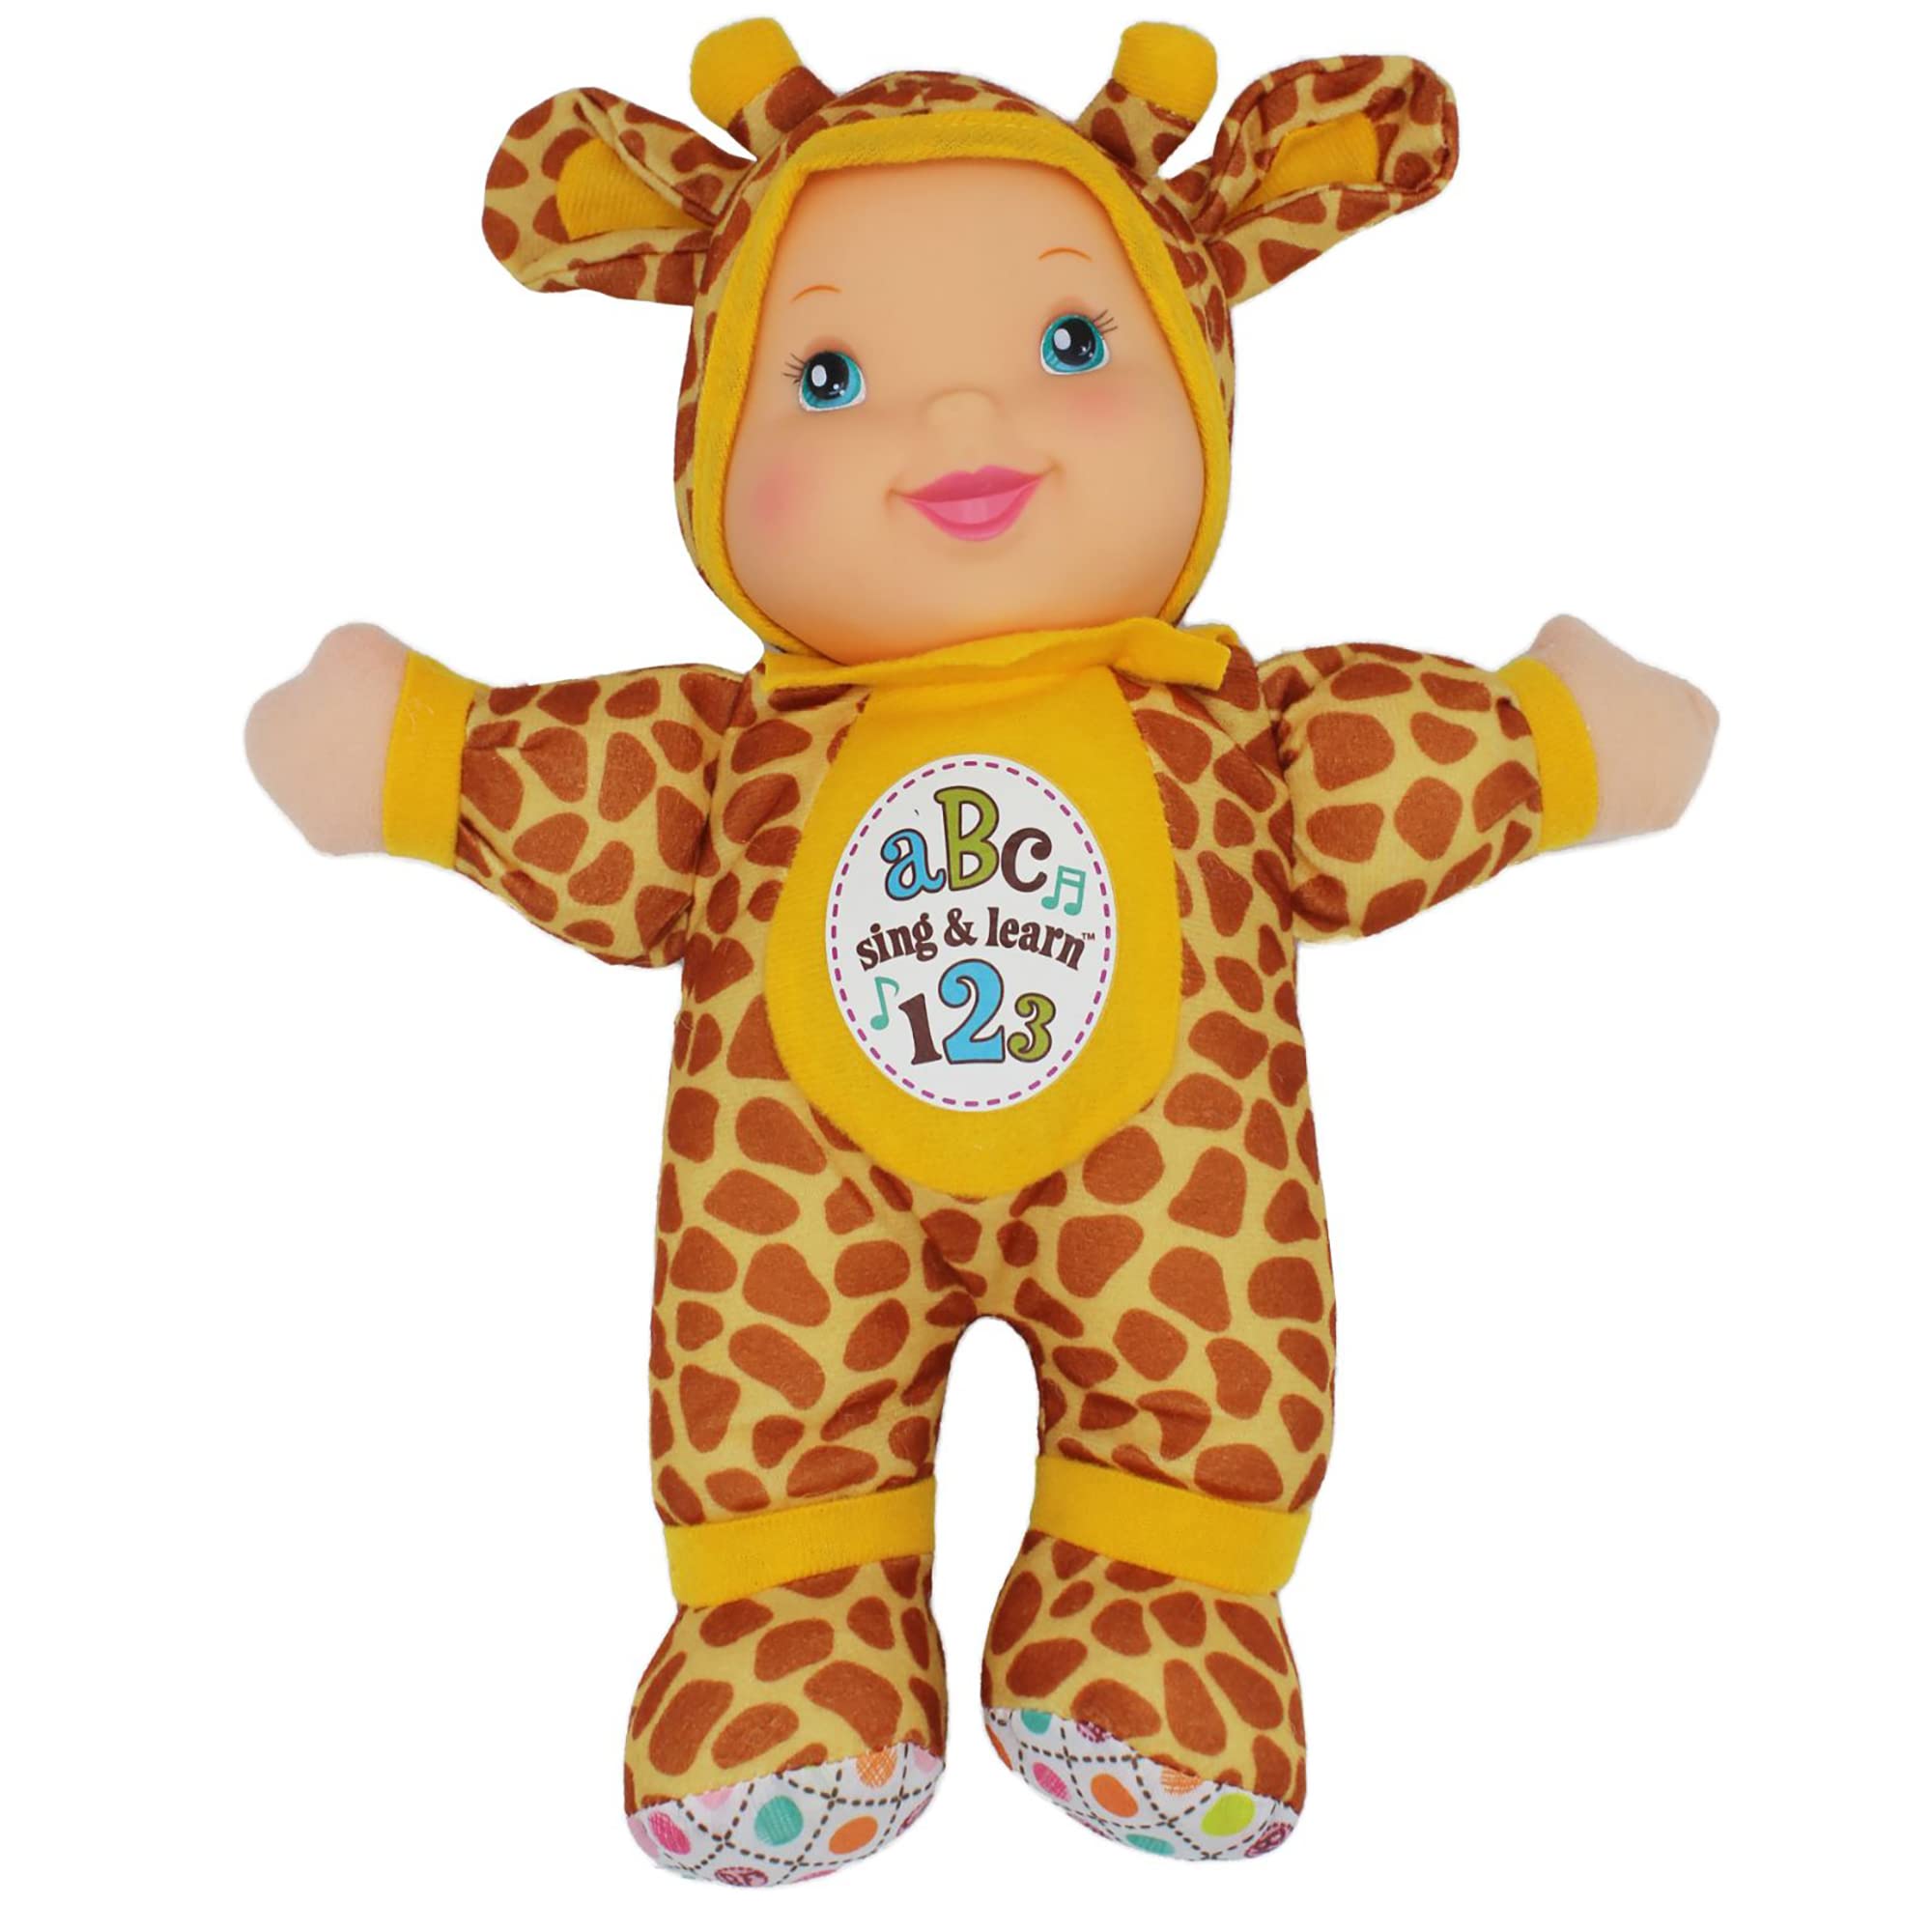 Baby's First First Sing & Learn 11' Doll, Elephant, Sings ABCs & 123s, Machine Washable, Lifelike Features, for Ages 0+